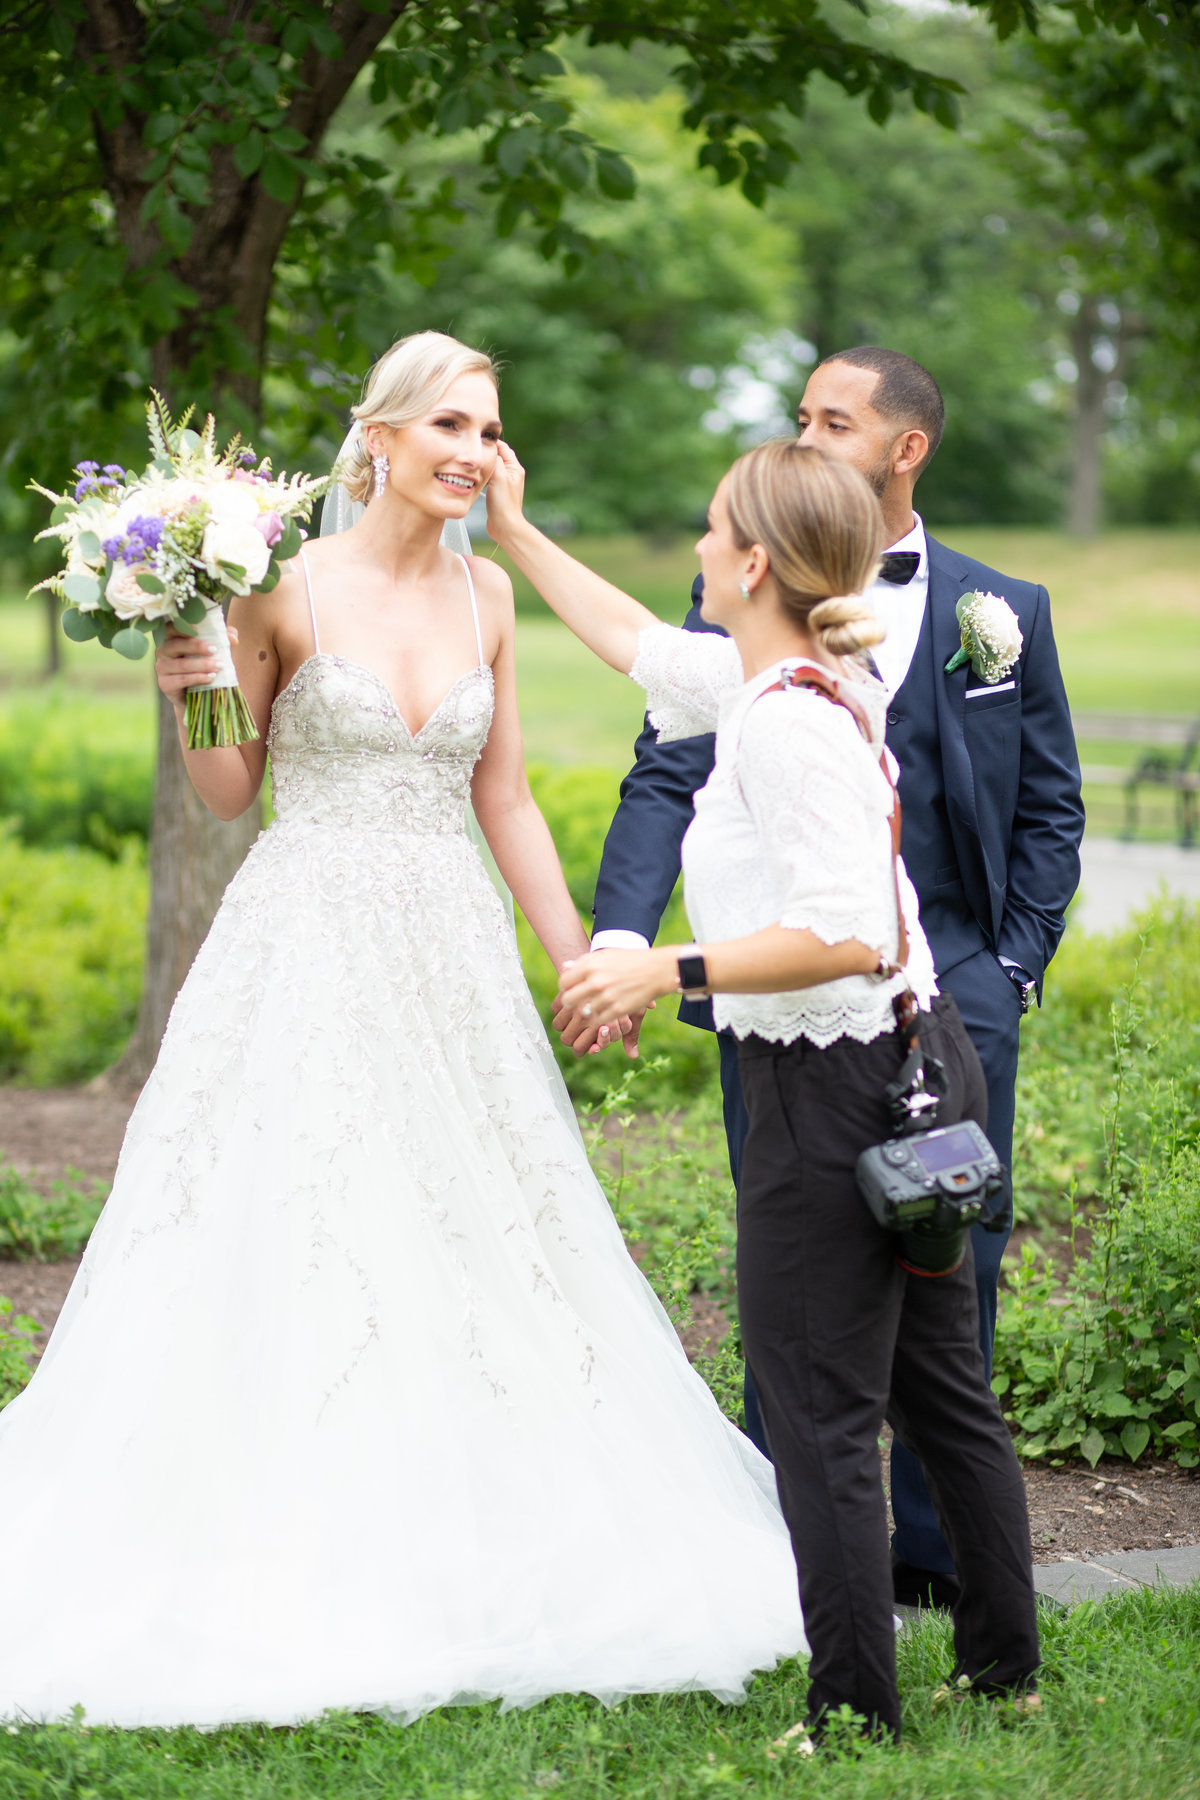 Ashley Mac Photographs - New Jersey Weddings - Behind the Scenes of a Wedding - BTS-32